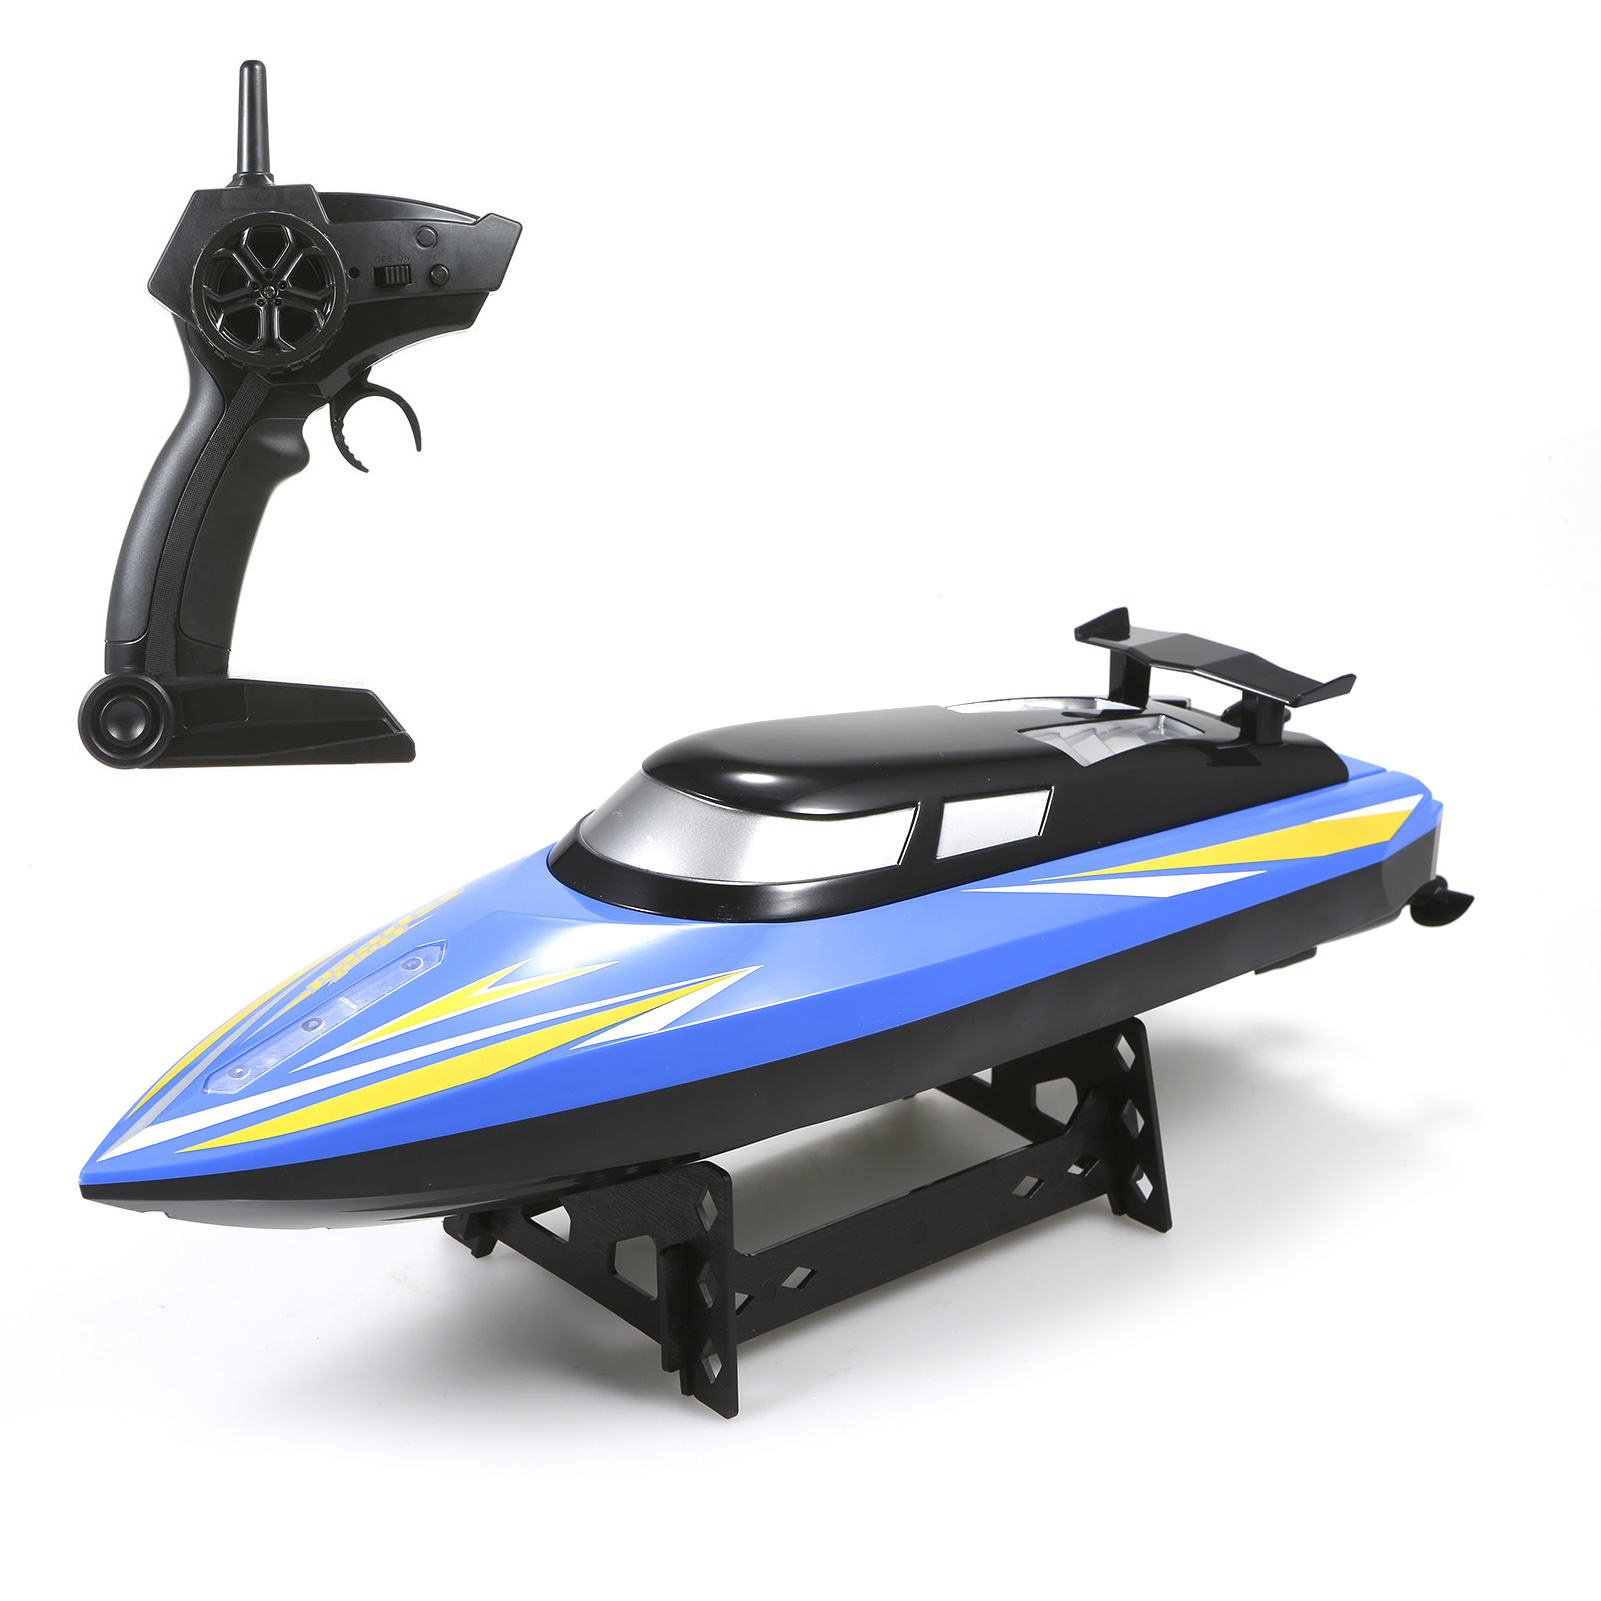 2.4GHz RC Boat Remote Control Boats 25km/h Speed 41cm RC Boat Toy Gift for Kids Adults Boys 3-speed Low Battery Alarm